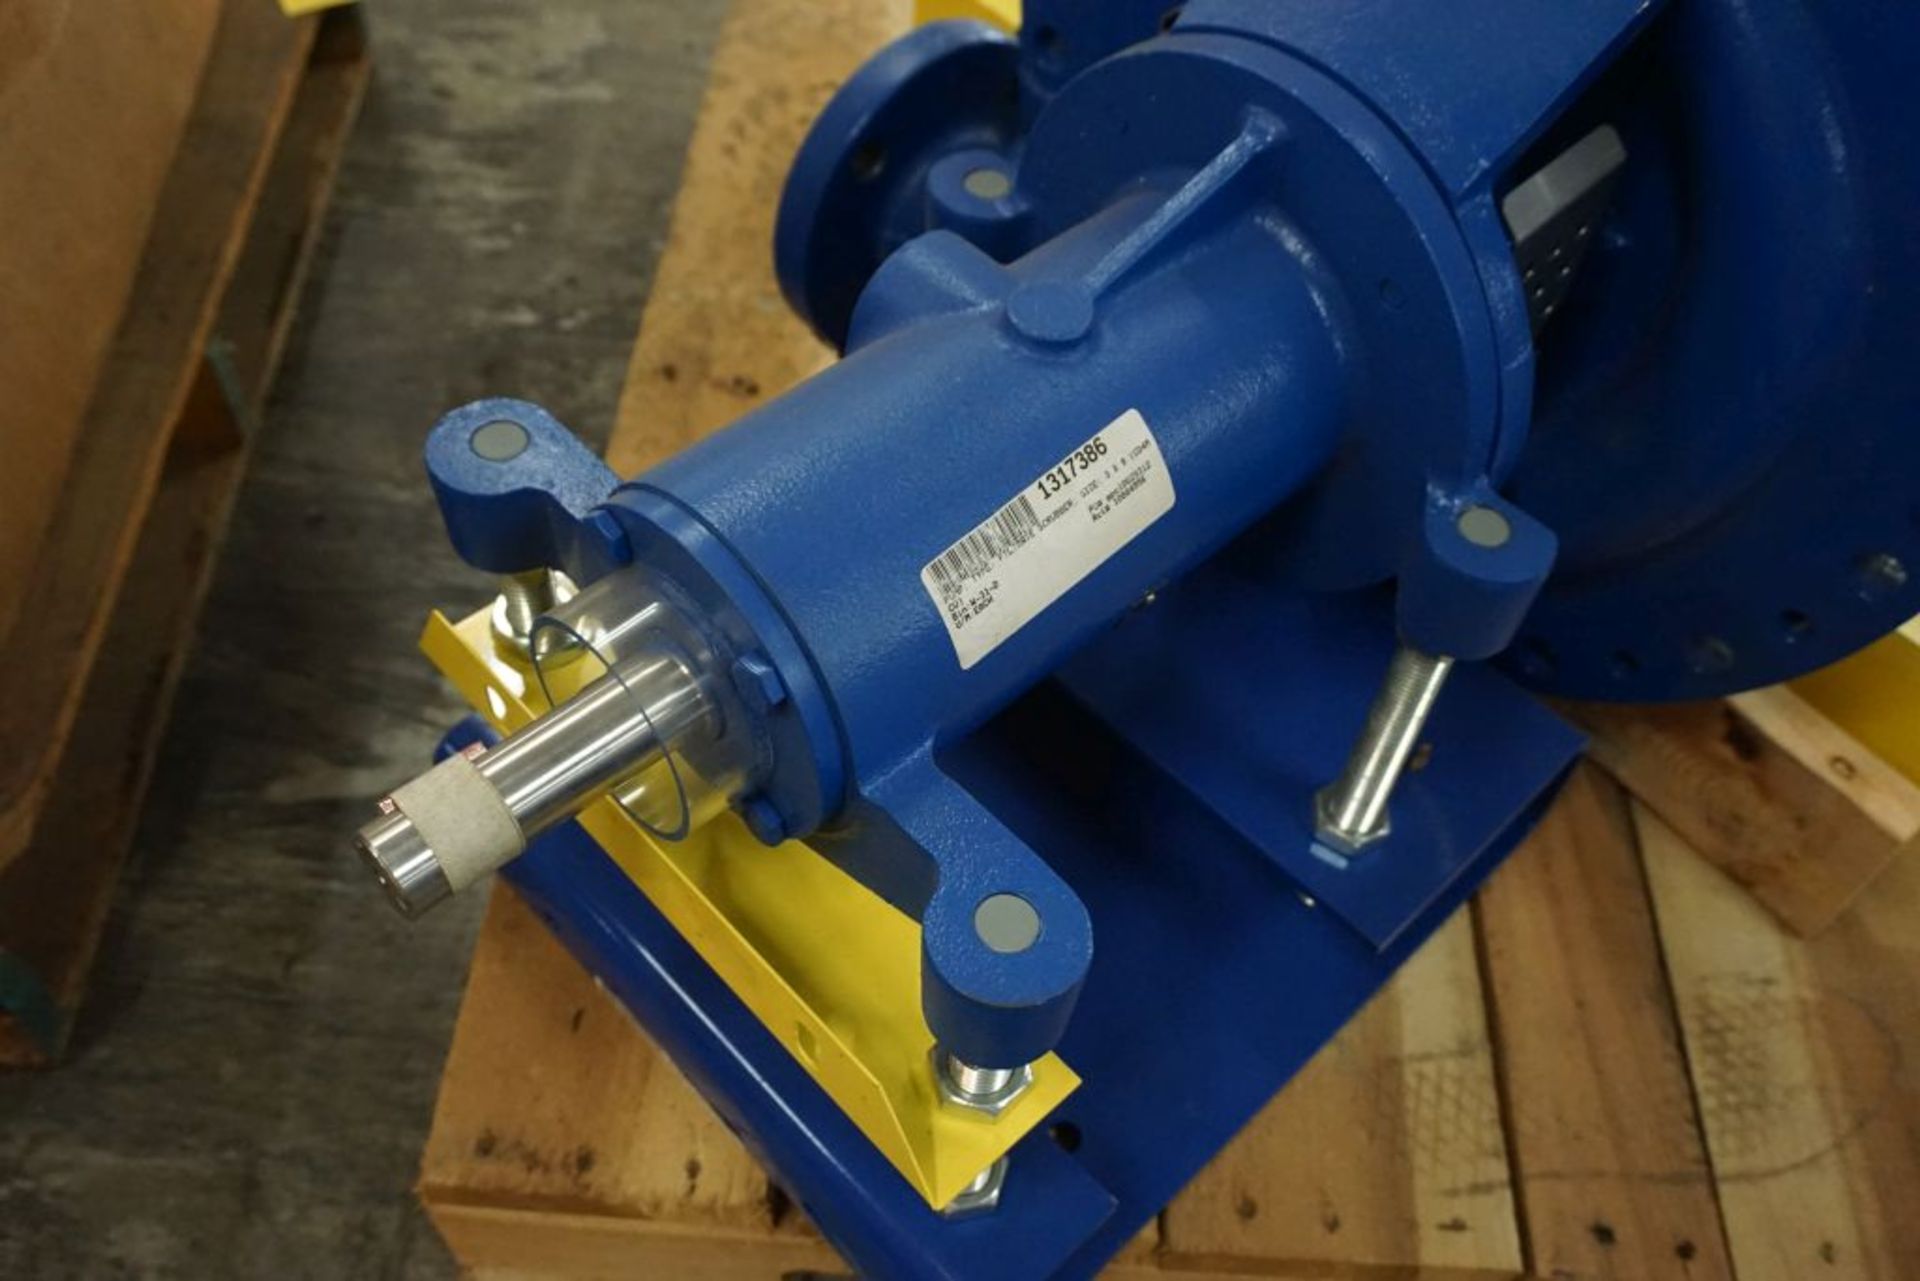 Filtrate 3 x 9 Pump|Lot Loading Fee: $5.00 - Image 7 of 7